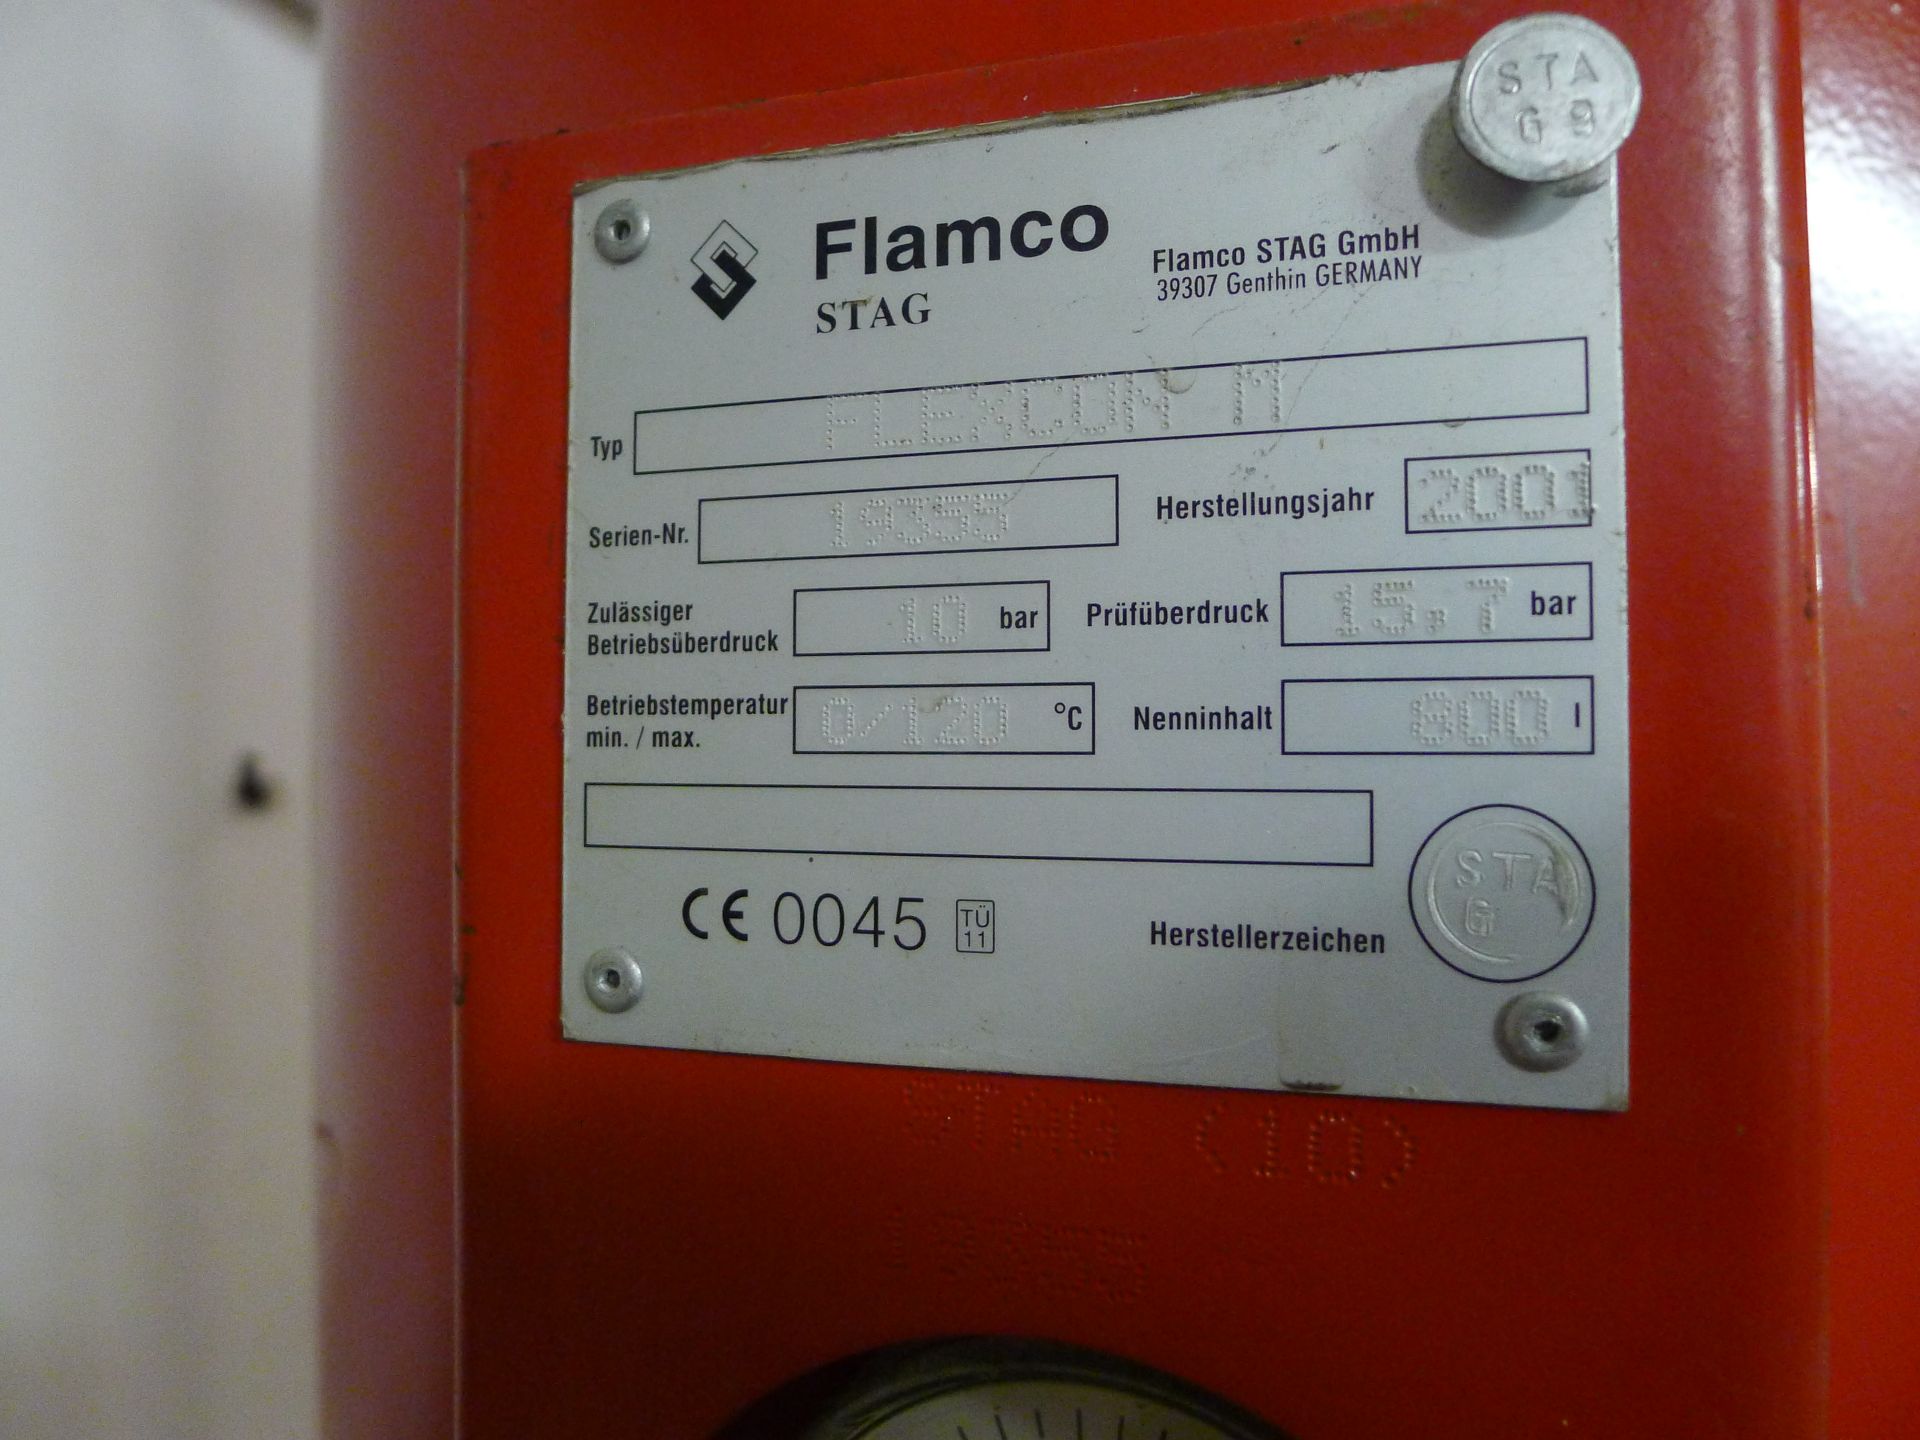 Flamco Flexcon M, 800 Ltr Capacity Pressure Vessel S/N 19355 (Dismantling and Loading Fee: €175) - Image 2 of 2